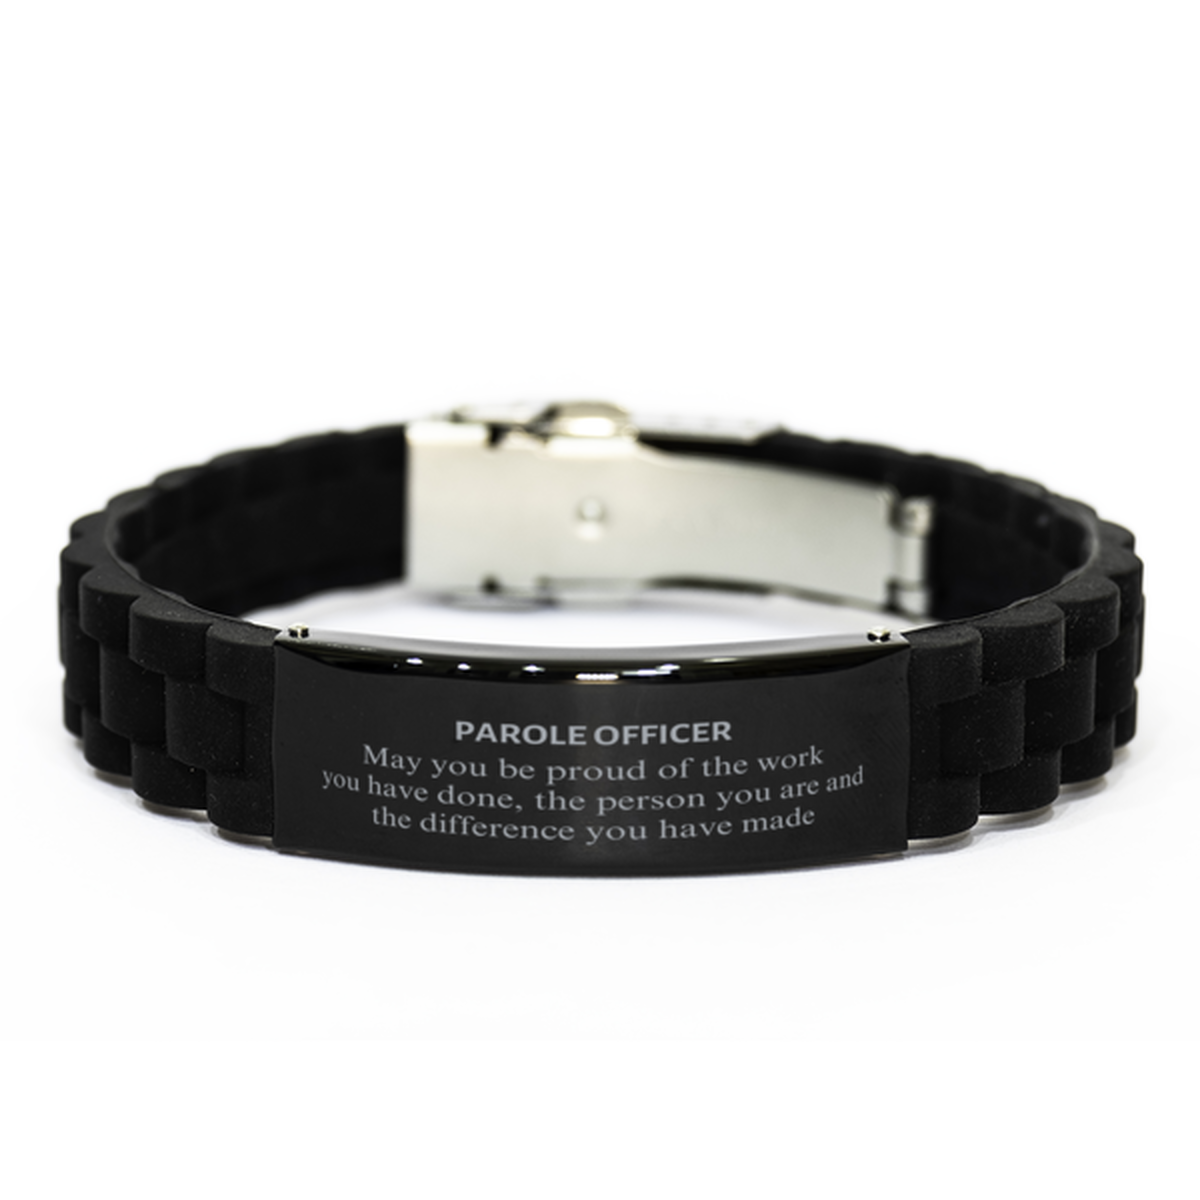 Parole Officer May you be proud of the work you have done, Retirement Parole Officer Black Glidelock Clasp Bracelet for Colleague Appreciation Gifts Amazing for Parole Officer